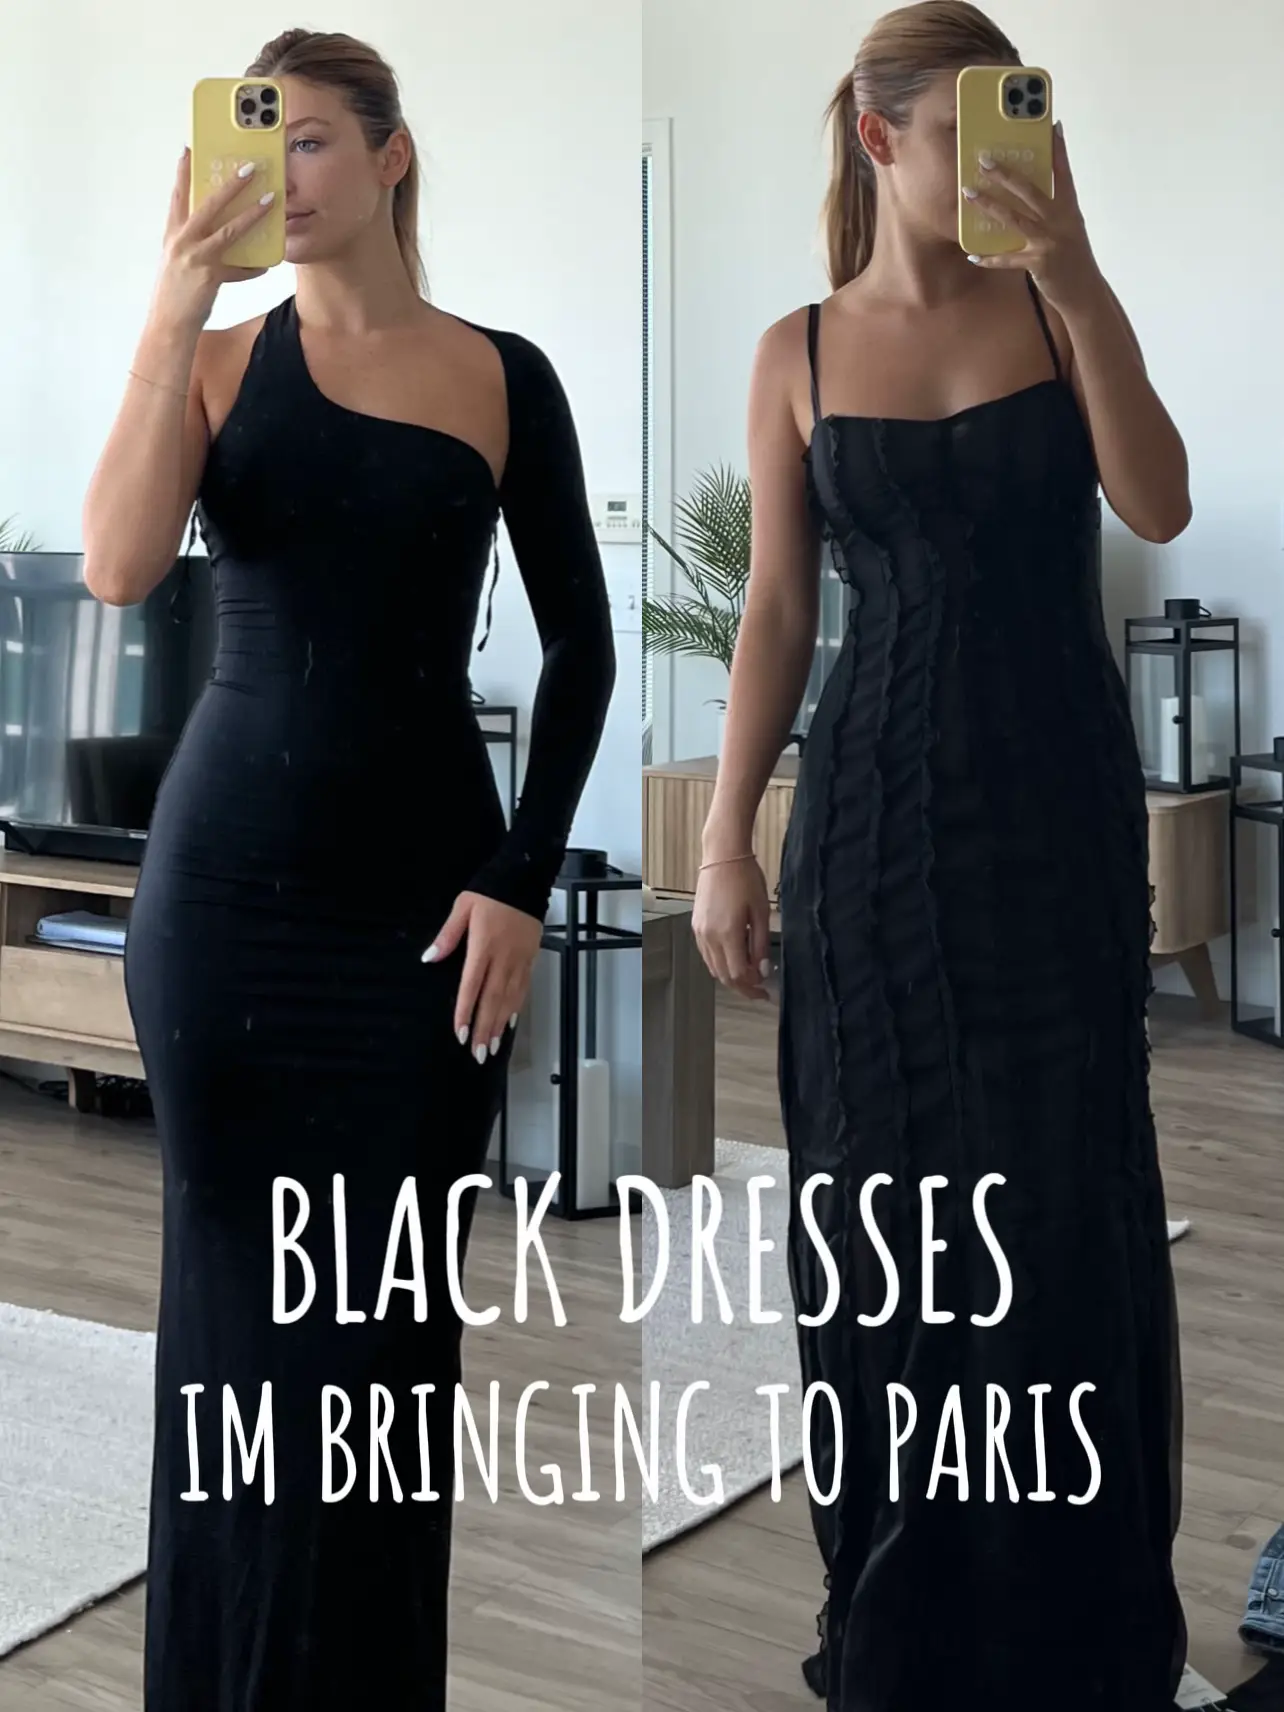 Black maxi dresses I'm bringing to Paris🖤🤭, Gallery posted by Corryntimm